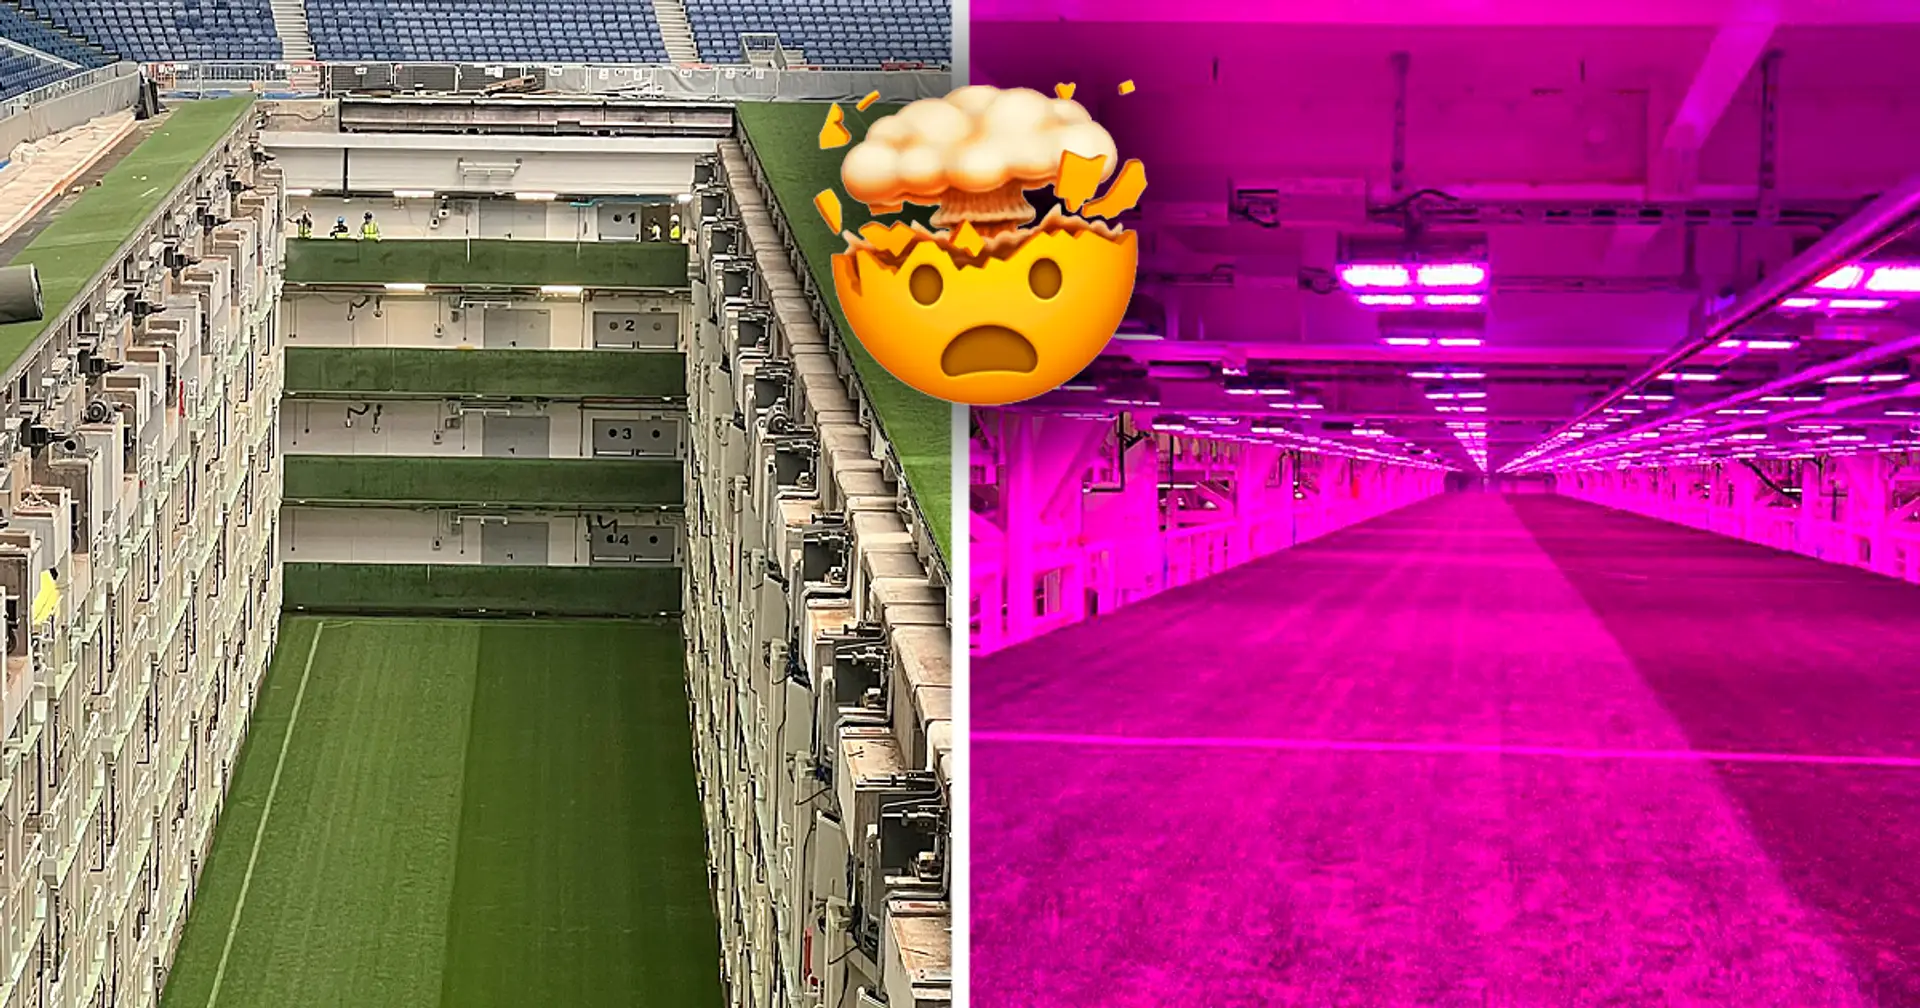 The greenhouse under the Bernabeu explained - what it is, what it does, how it makes the Real Madrid stadium the best in the world